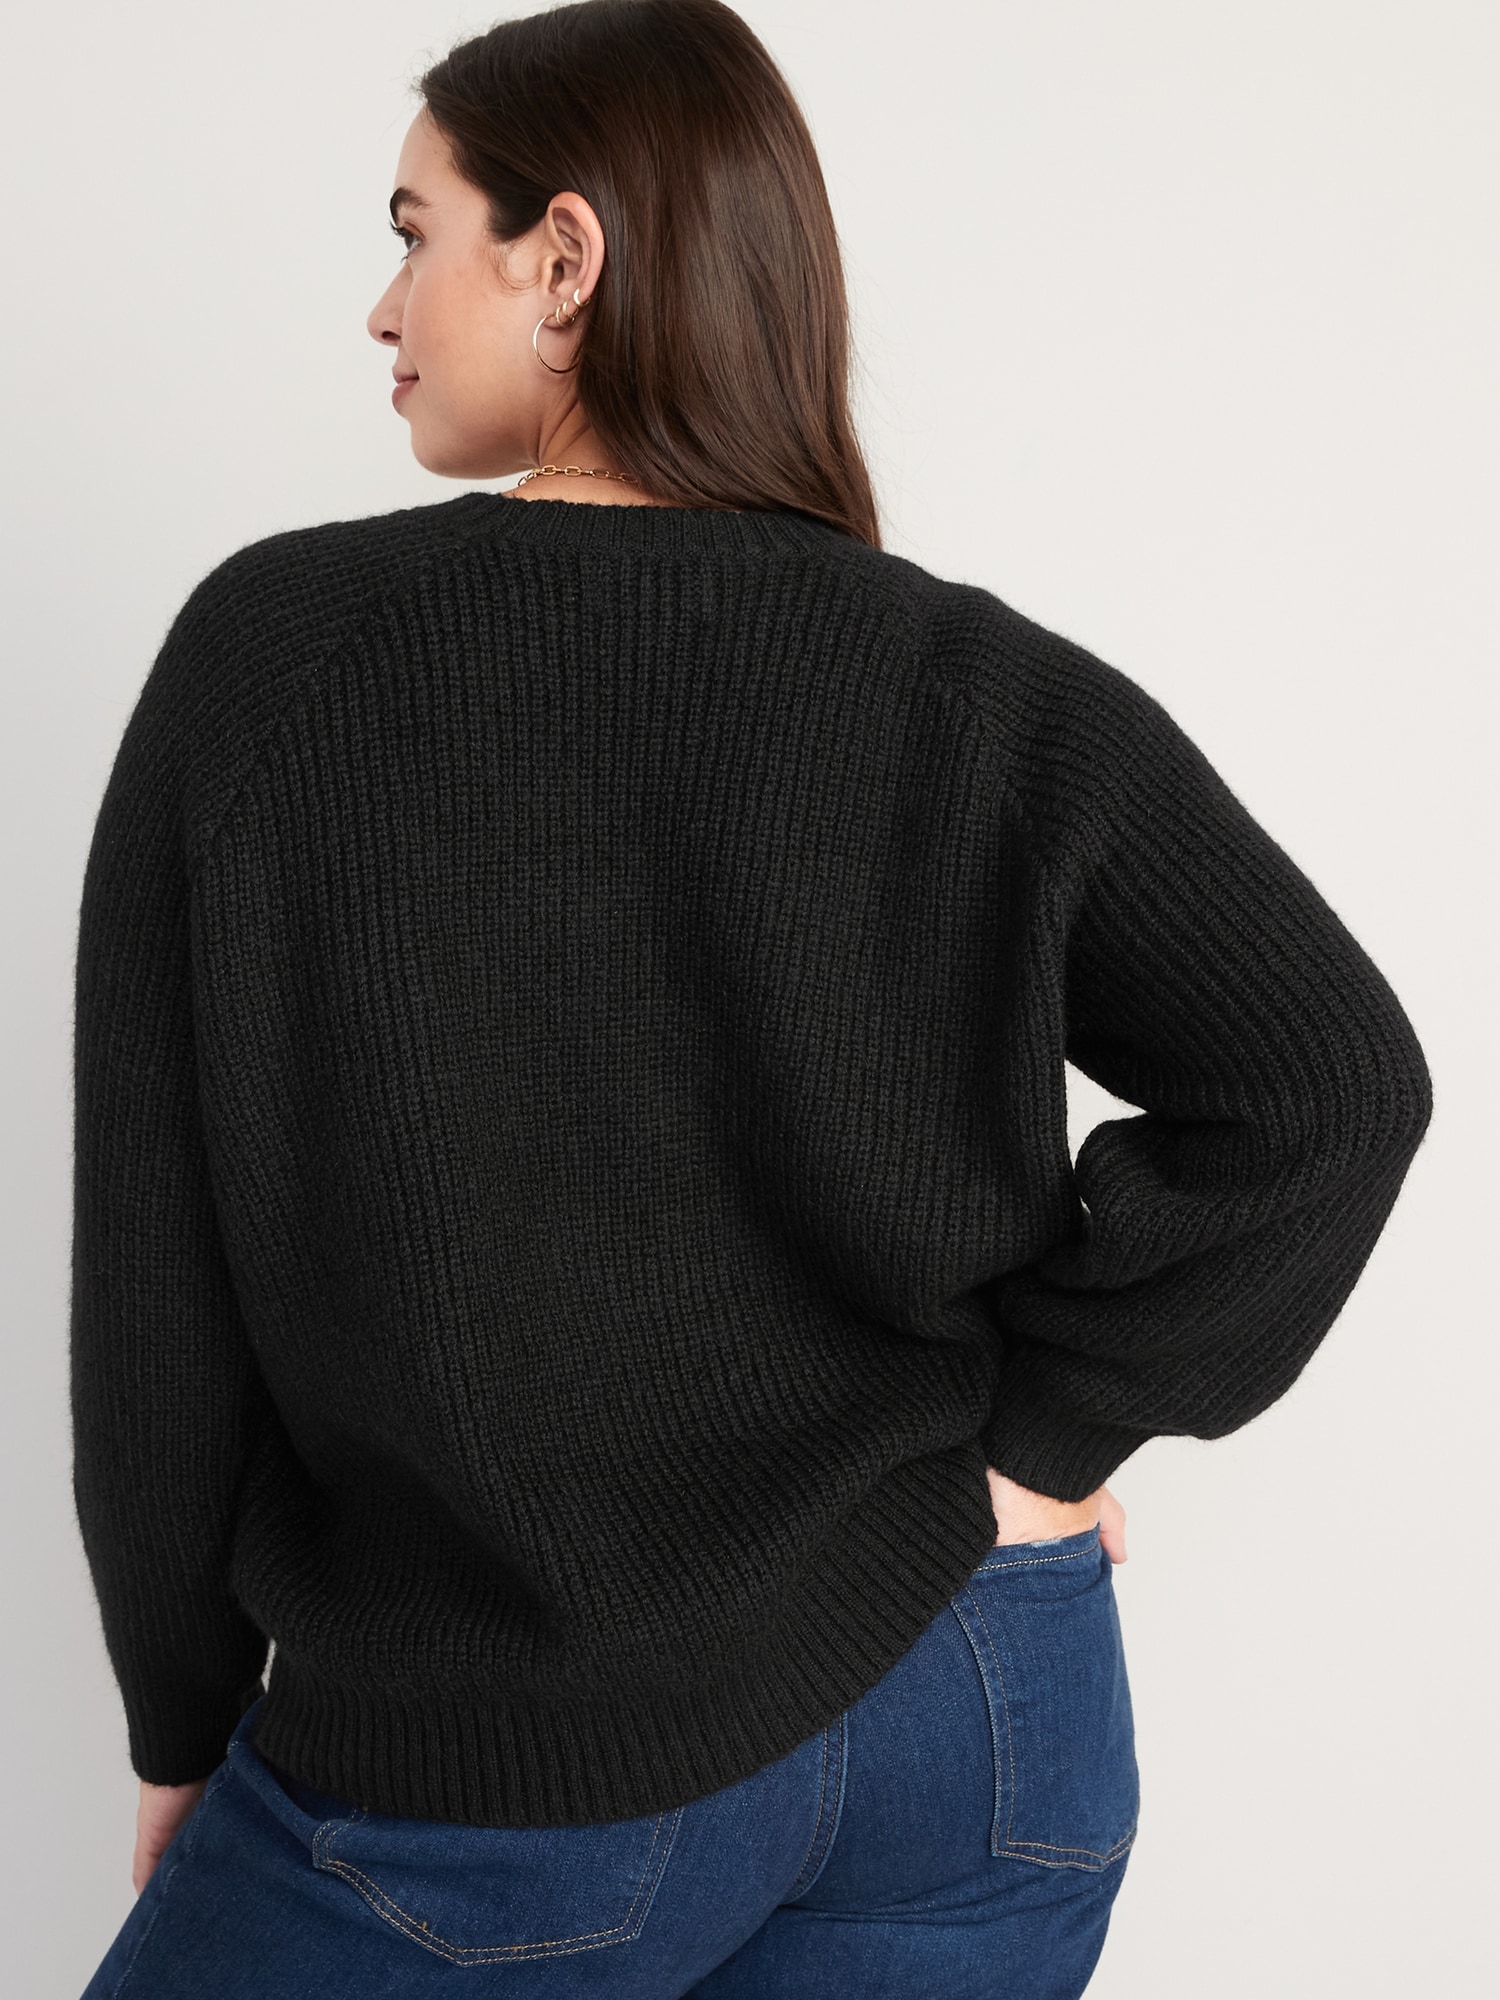 Cozy Shaker-Stitch Pullover Sweater for Women | Old Navy